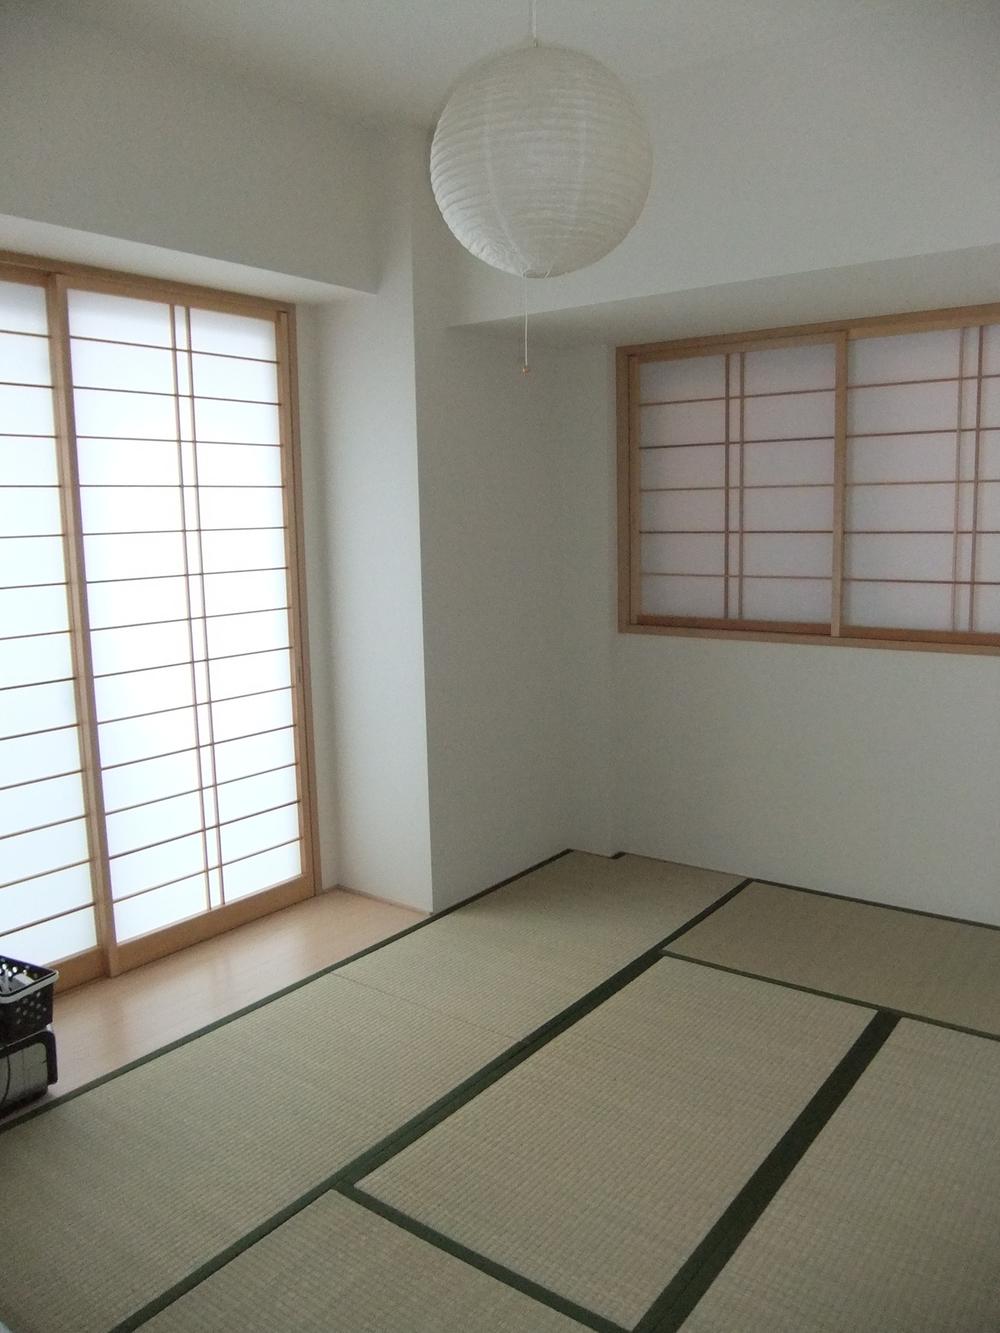 Other introspection. Japanese-style room (October 2013 shooting)